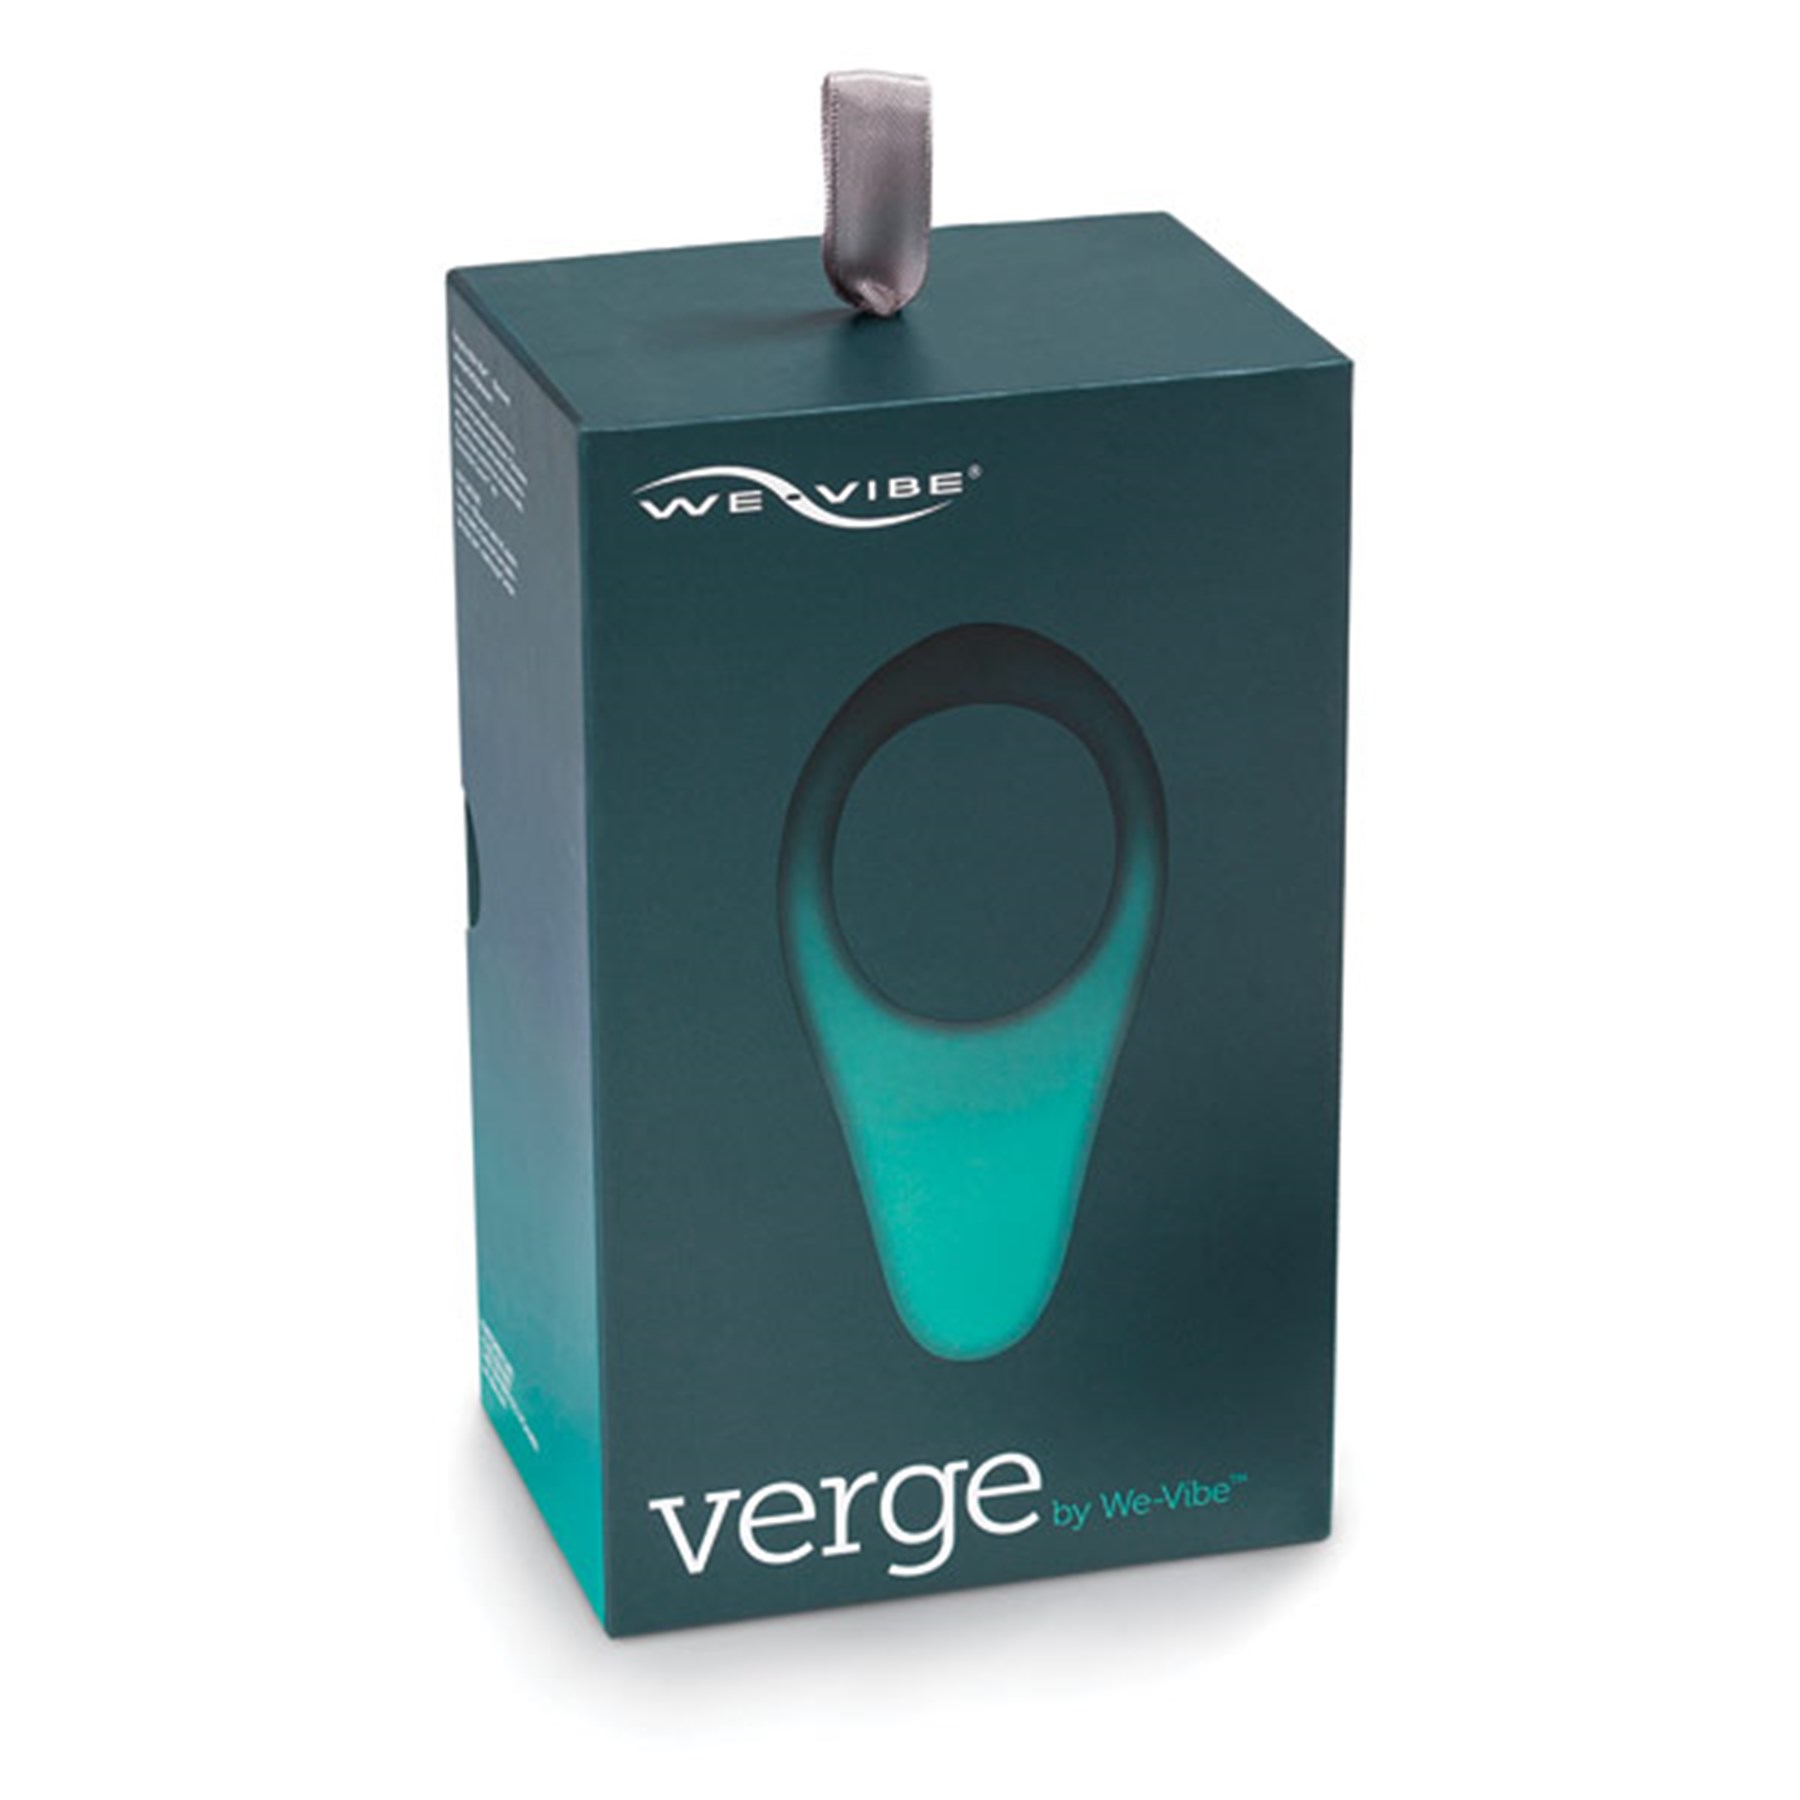 Verge By We-Vibe Vibrating Ring box cover